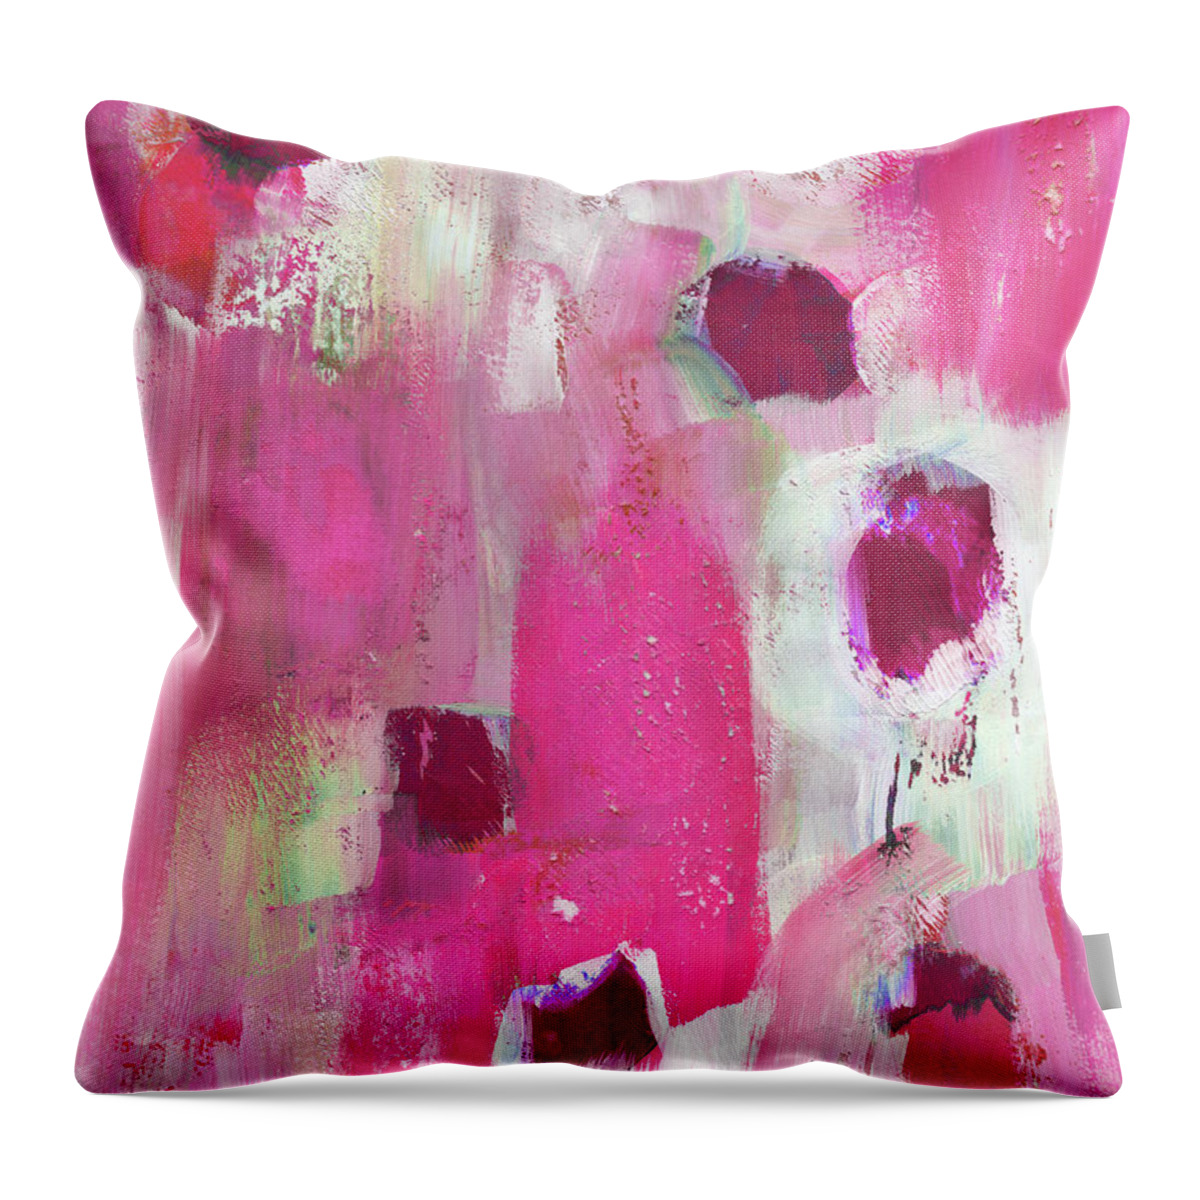 Pink Throw Pillow featuring the painting Elated- Abstract Art by Linda Woods by Linda Woods